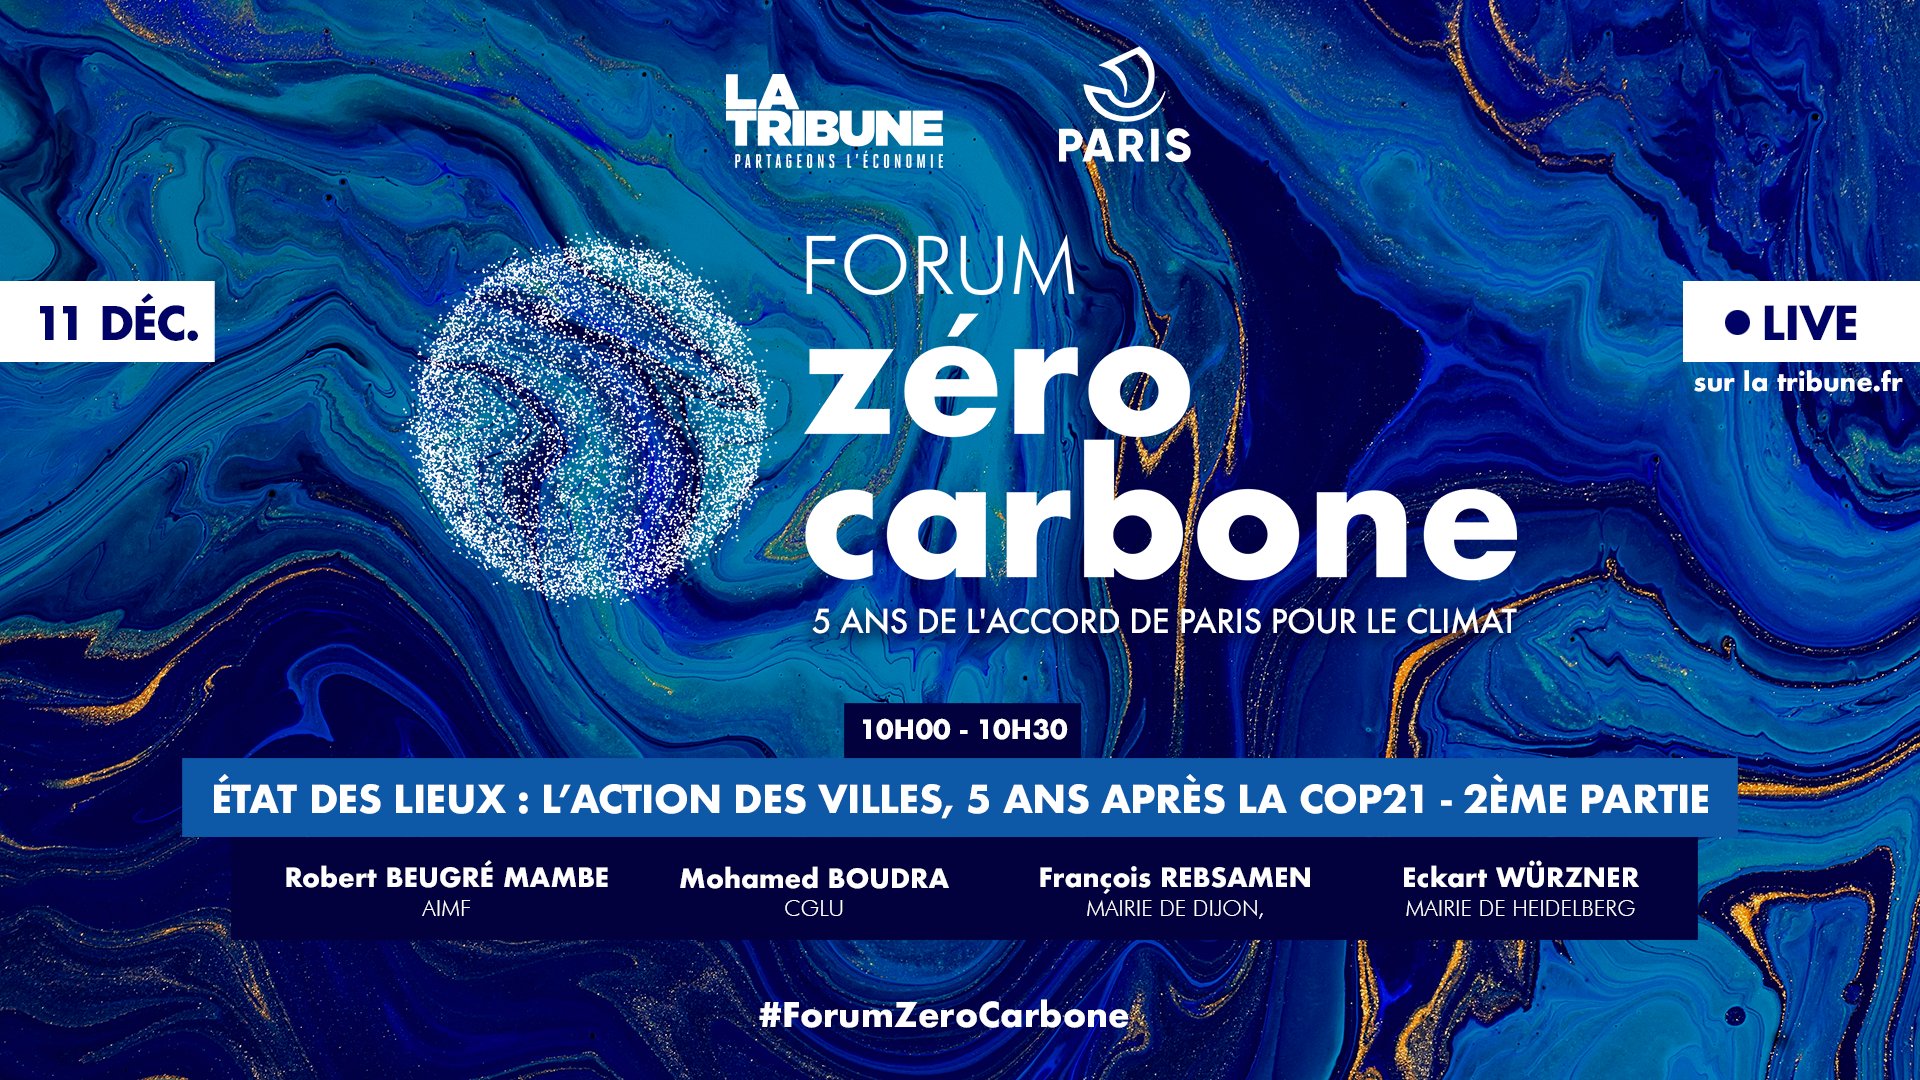 Forum Zero Carbone 5th Anniversary of the Paris Agreement on Climate